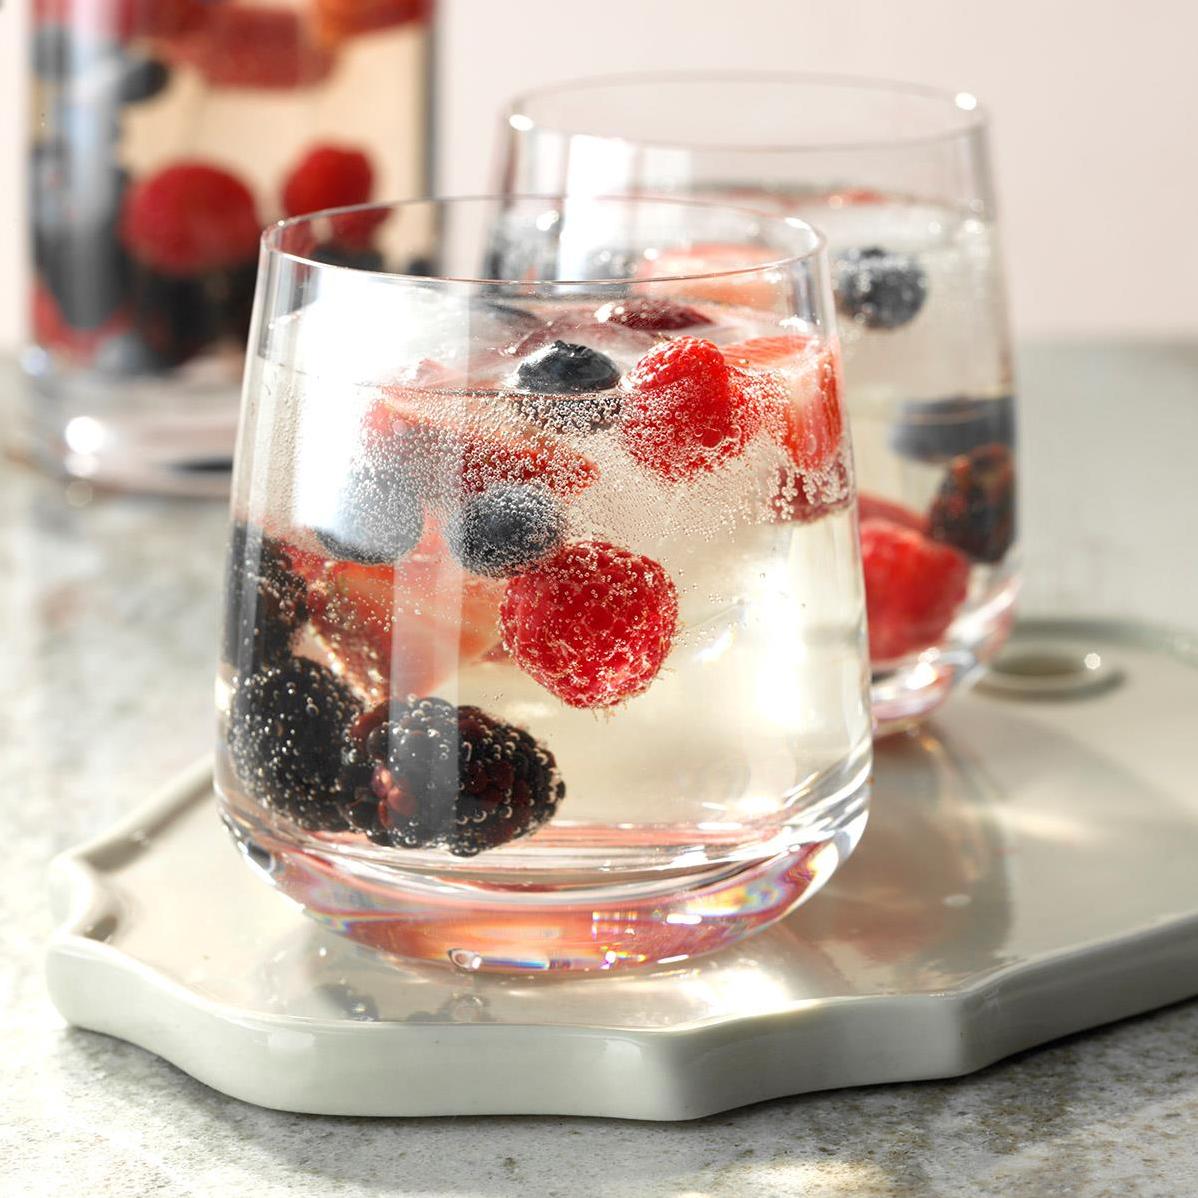  The perfect pitcher to entertain friends and family during summertime.